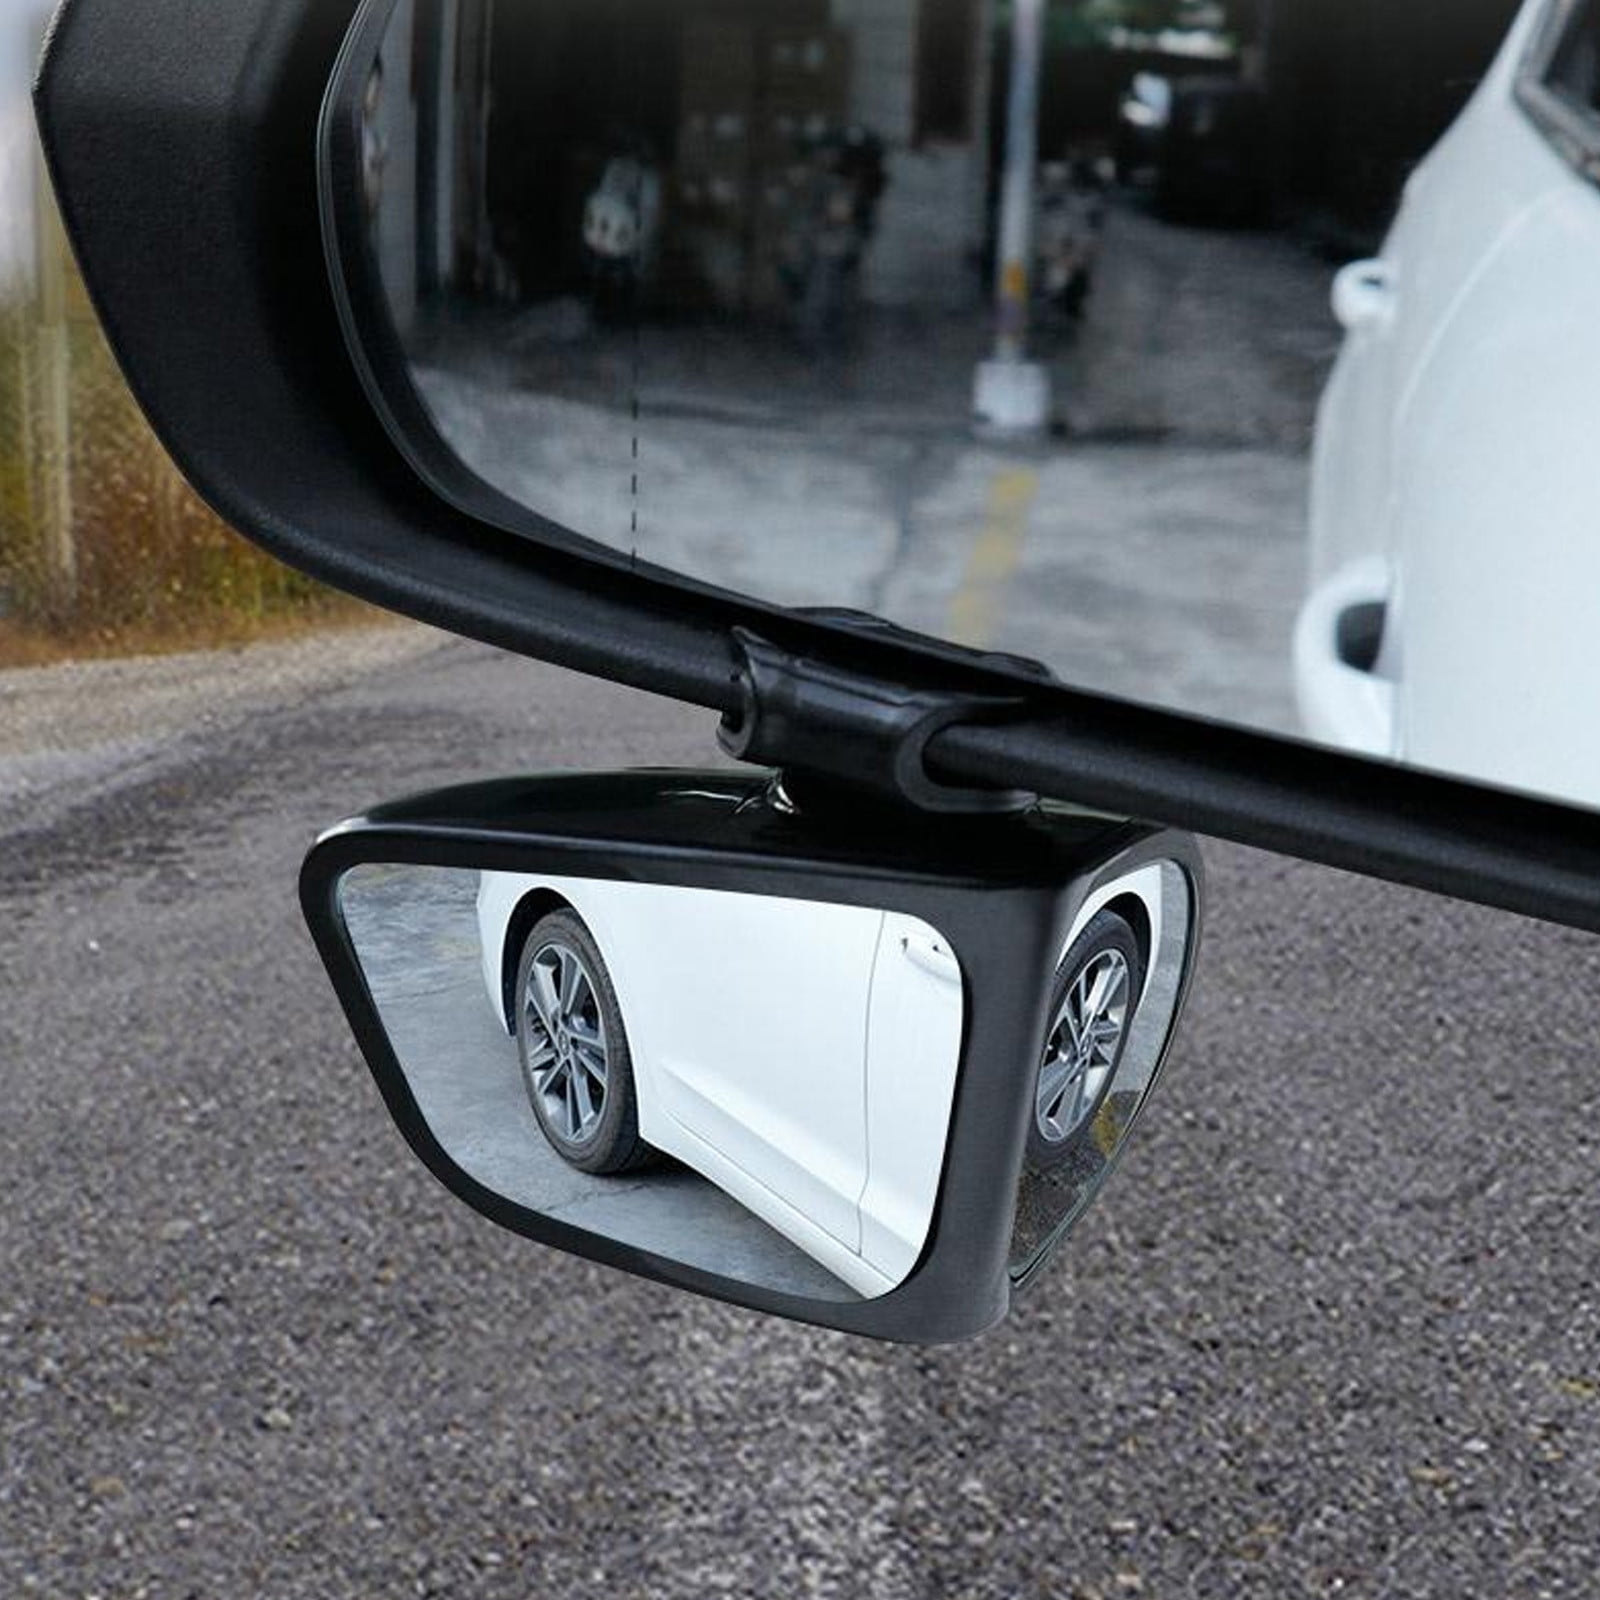 Car Accessories Clearance Shengxiny Car Blind Mirror 360 Degree Rotation Double Sided Wide Angle Rear View Mirror for Front Rear Wheels Observation